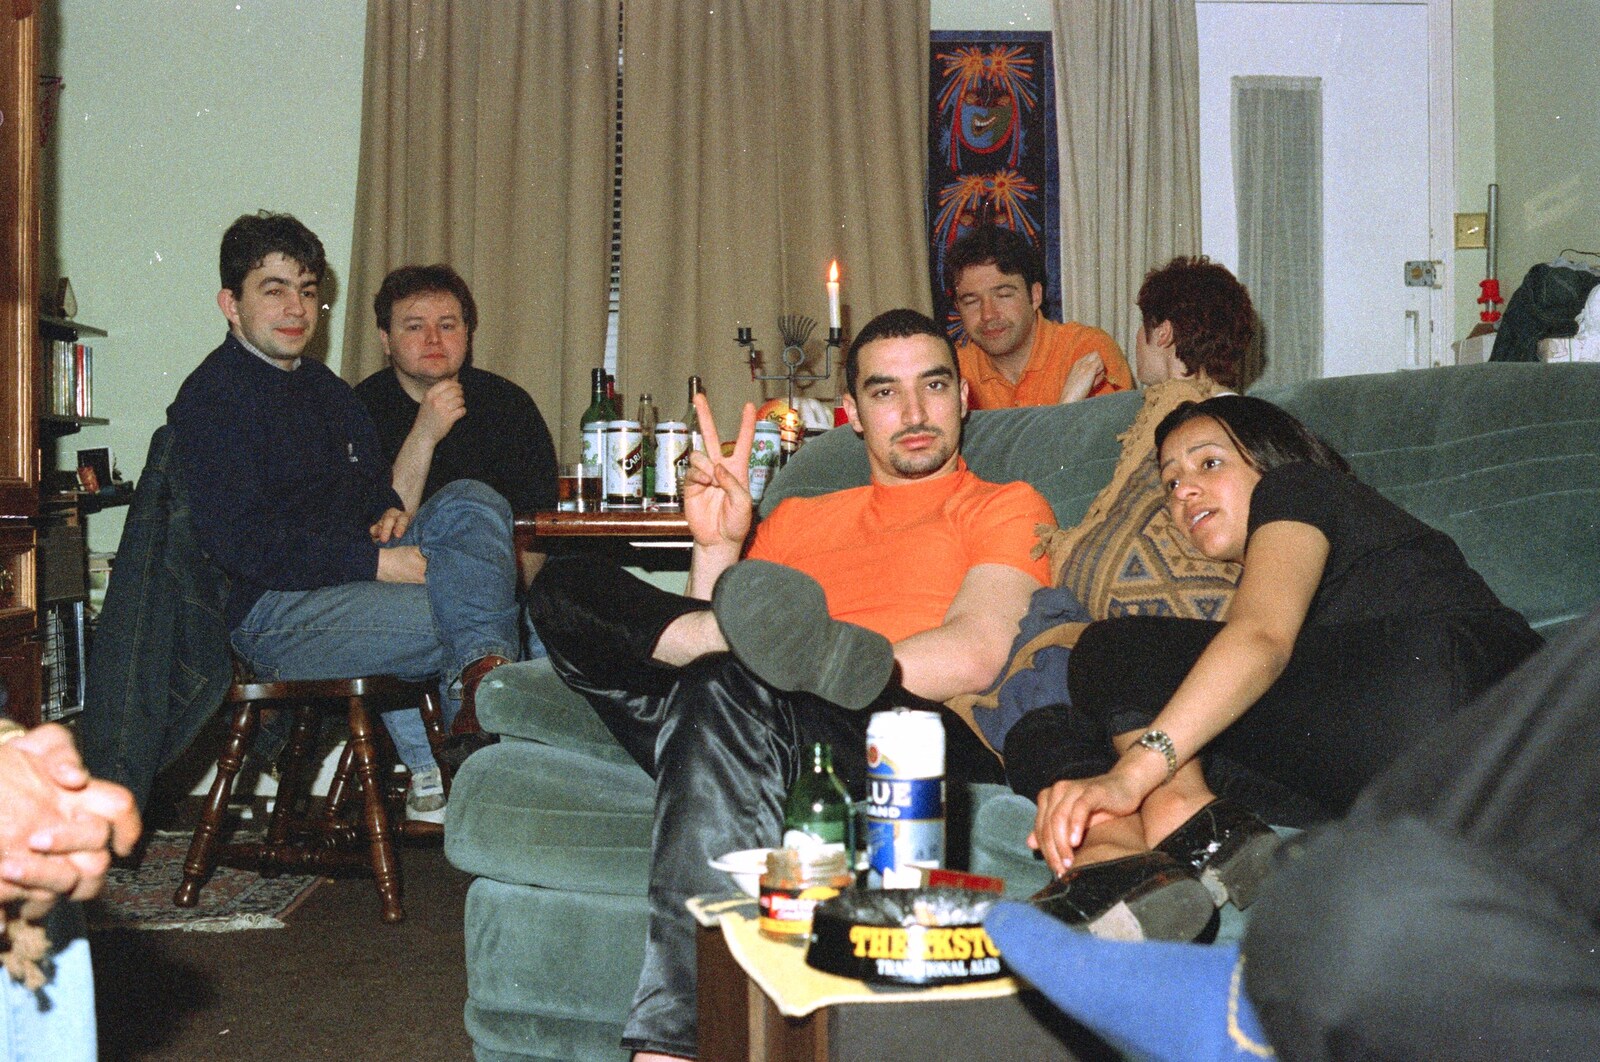 A CISU Party Round Trev's House, Cavendish Street, Ipswich - 17th May 1997: Orhan gives the victory/peace sign